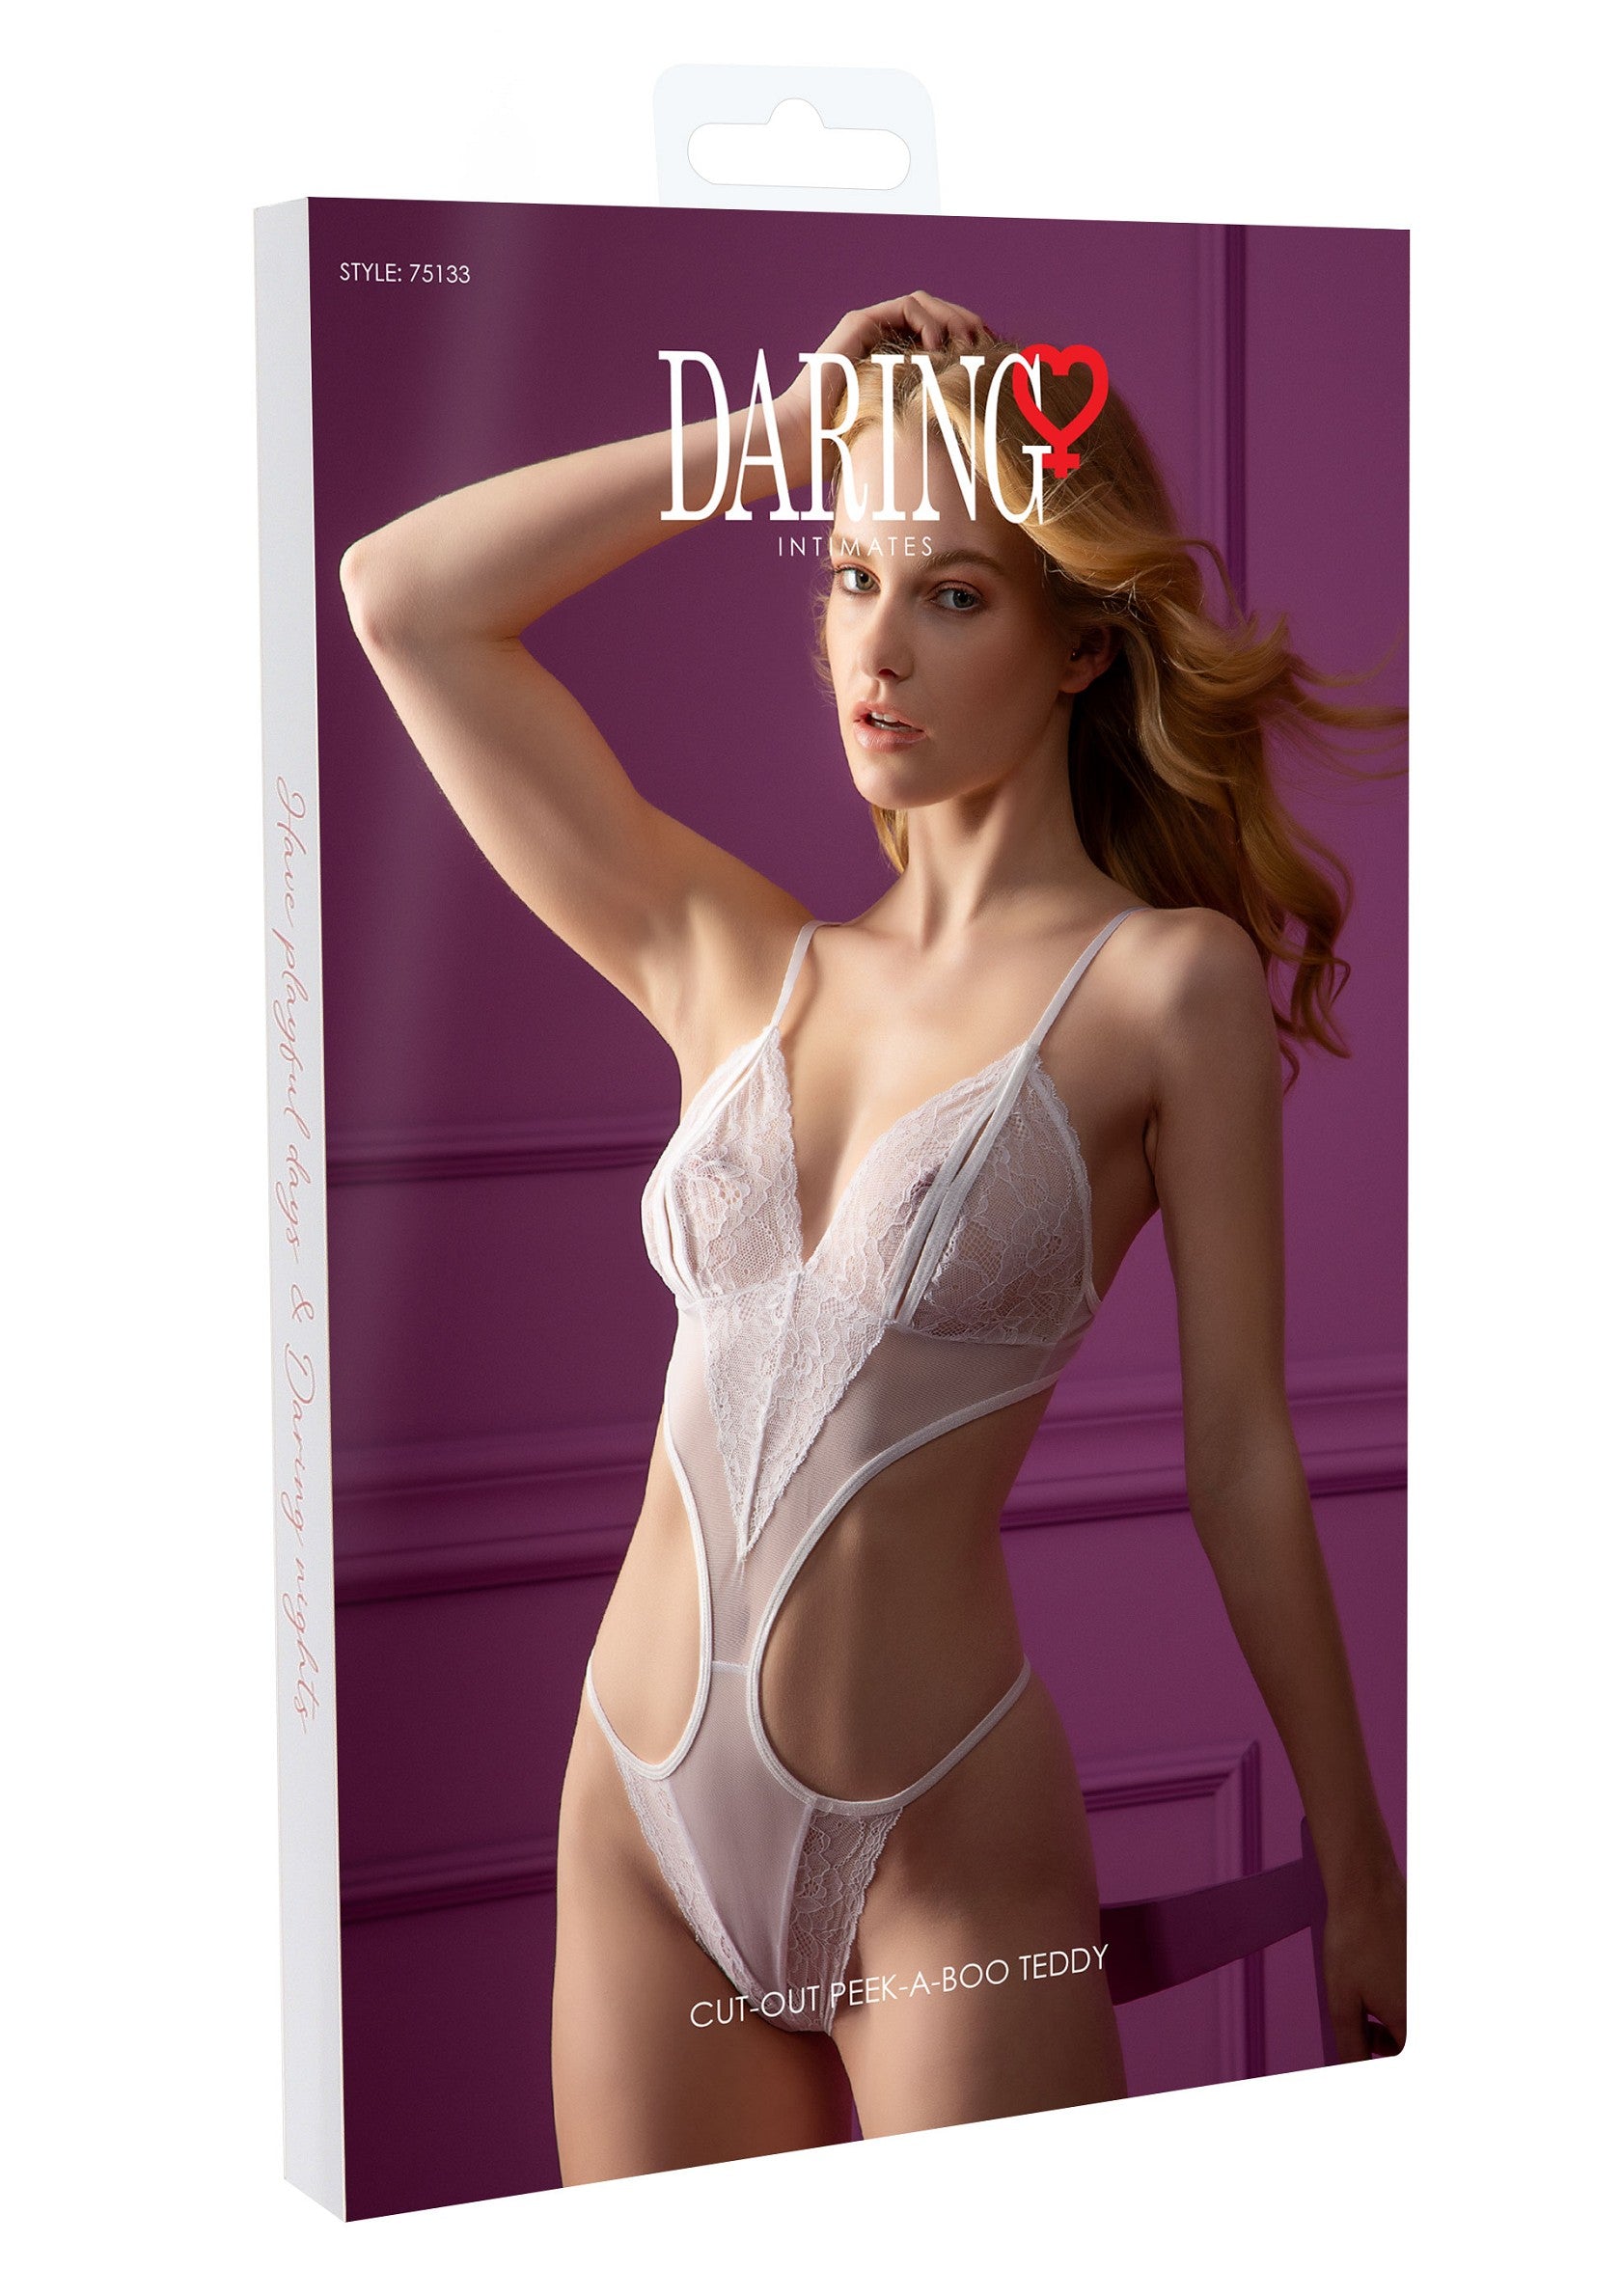 Daring Intimates Cut-out Peek-a-Boo Teddy WHITE S/M - 14